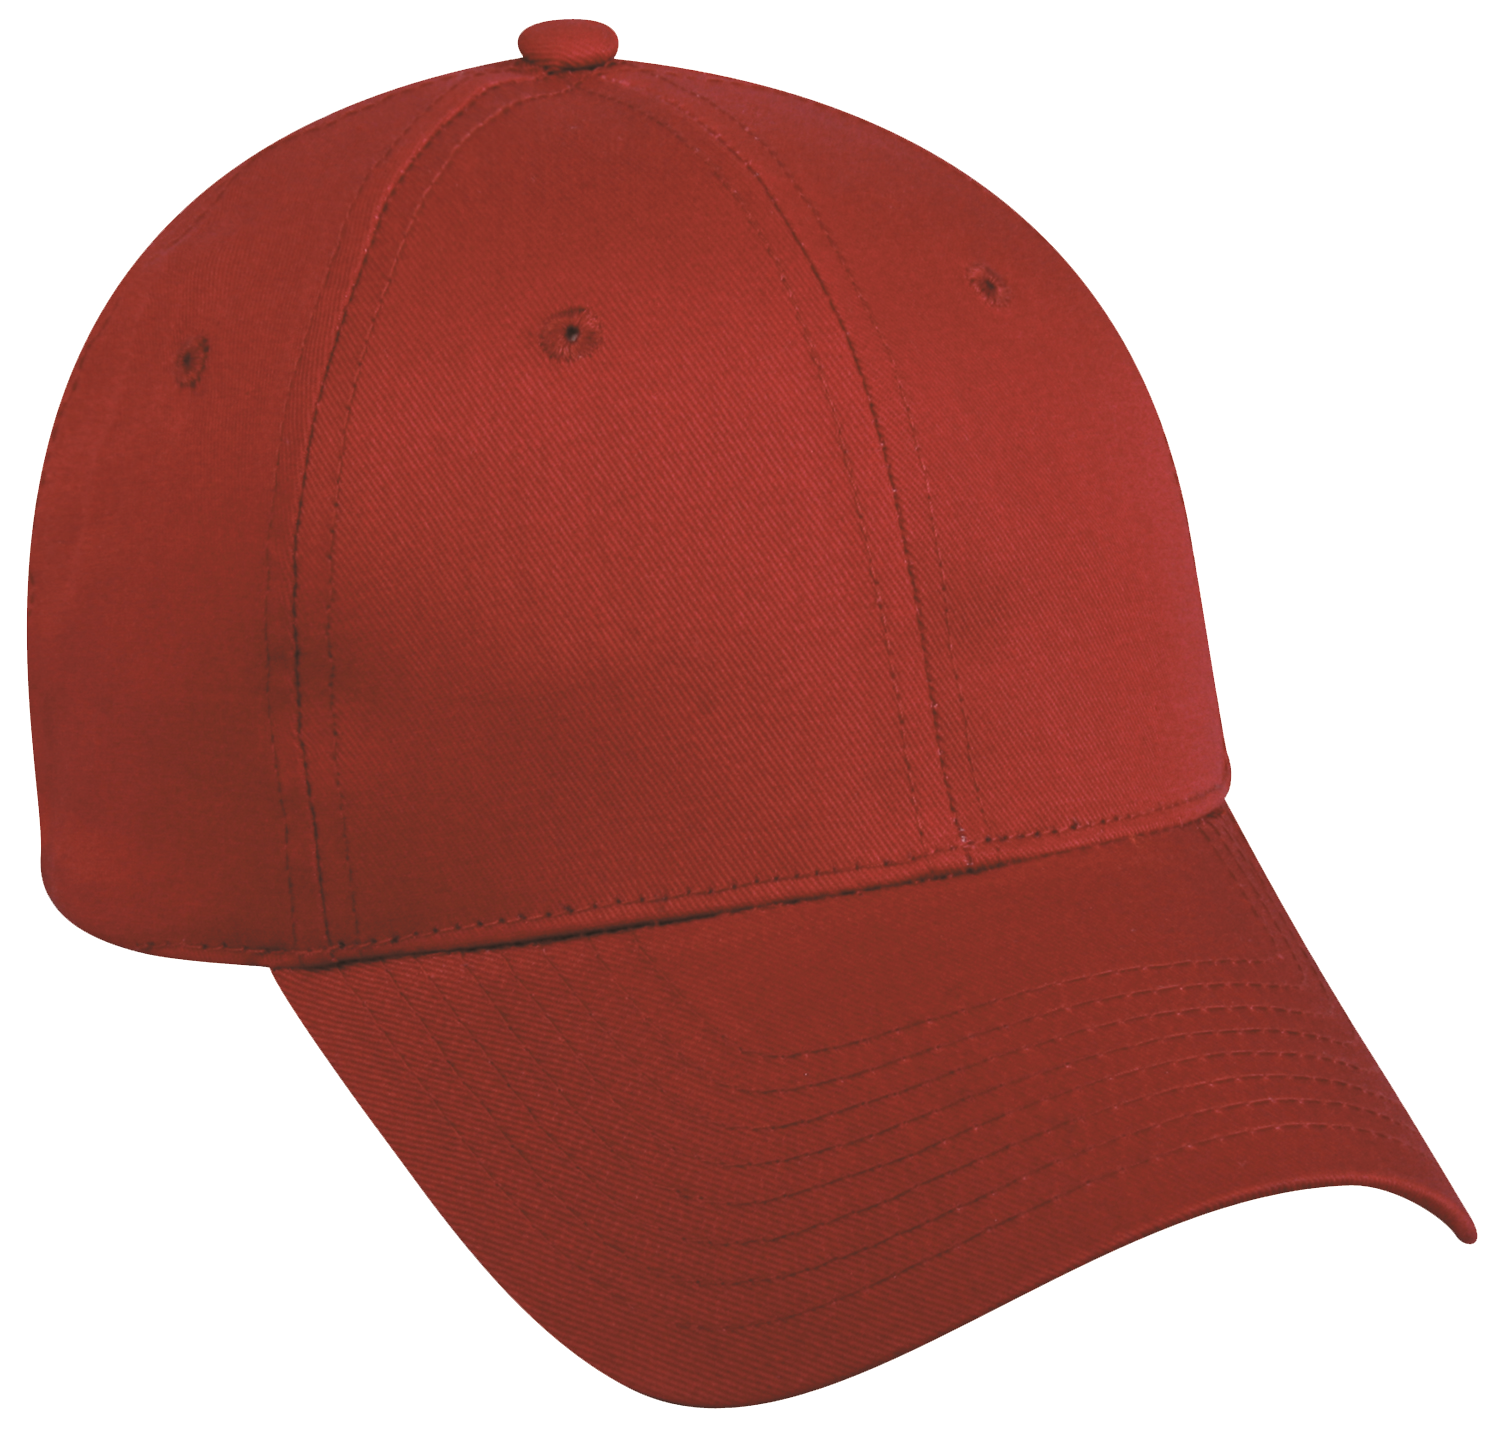 Download Baseball Cap PNG Transparent Image For Designing Projects.